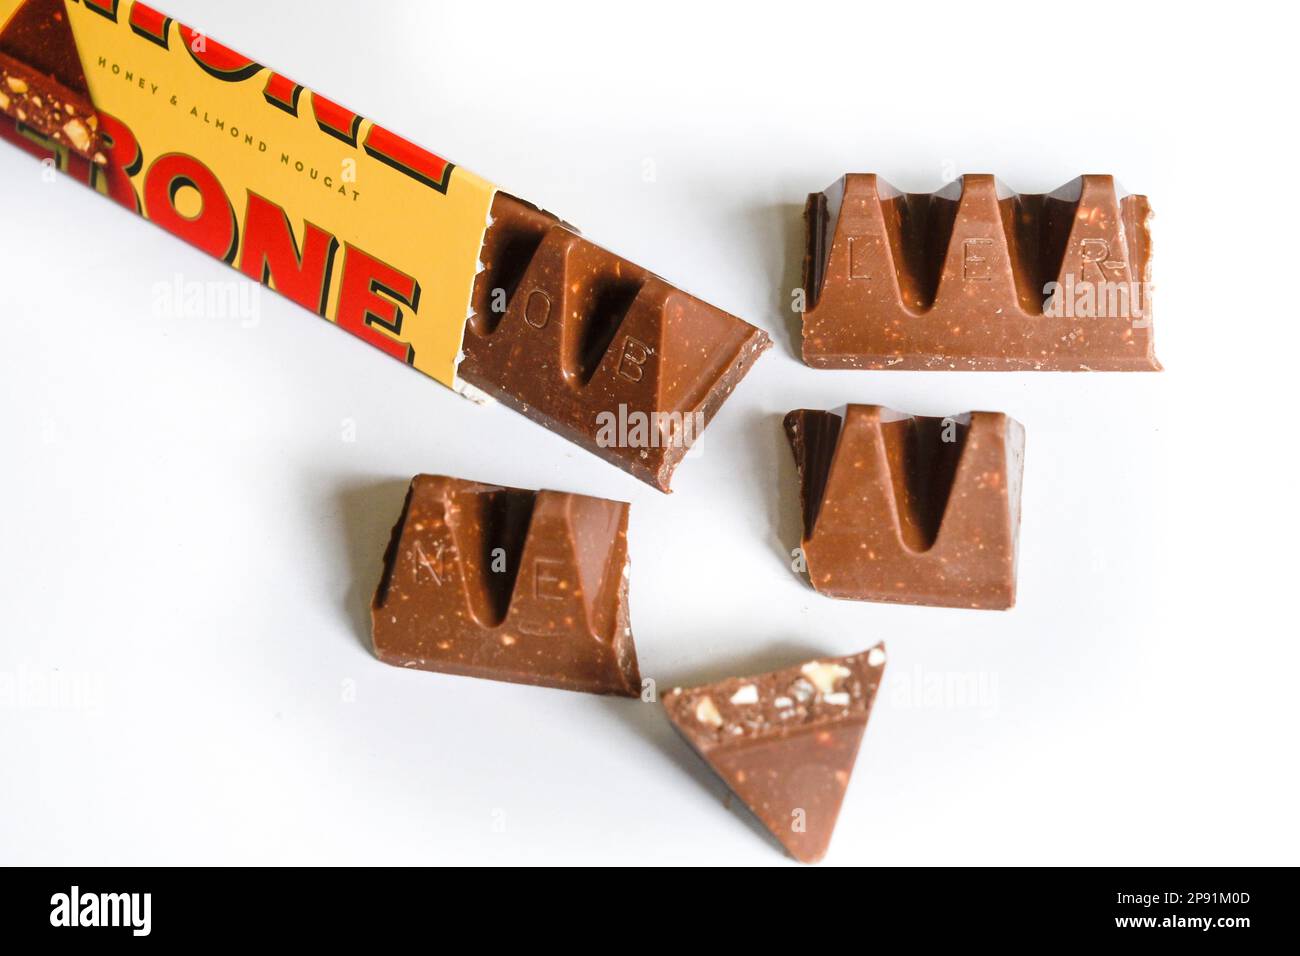 Toblerone minis hi-res stock photography and images - Alamy